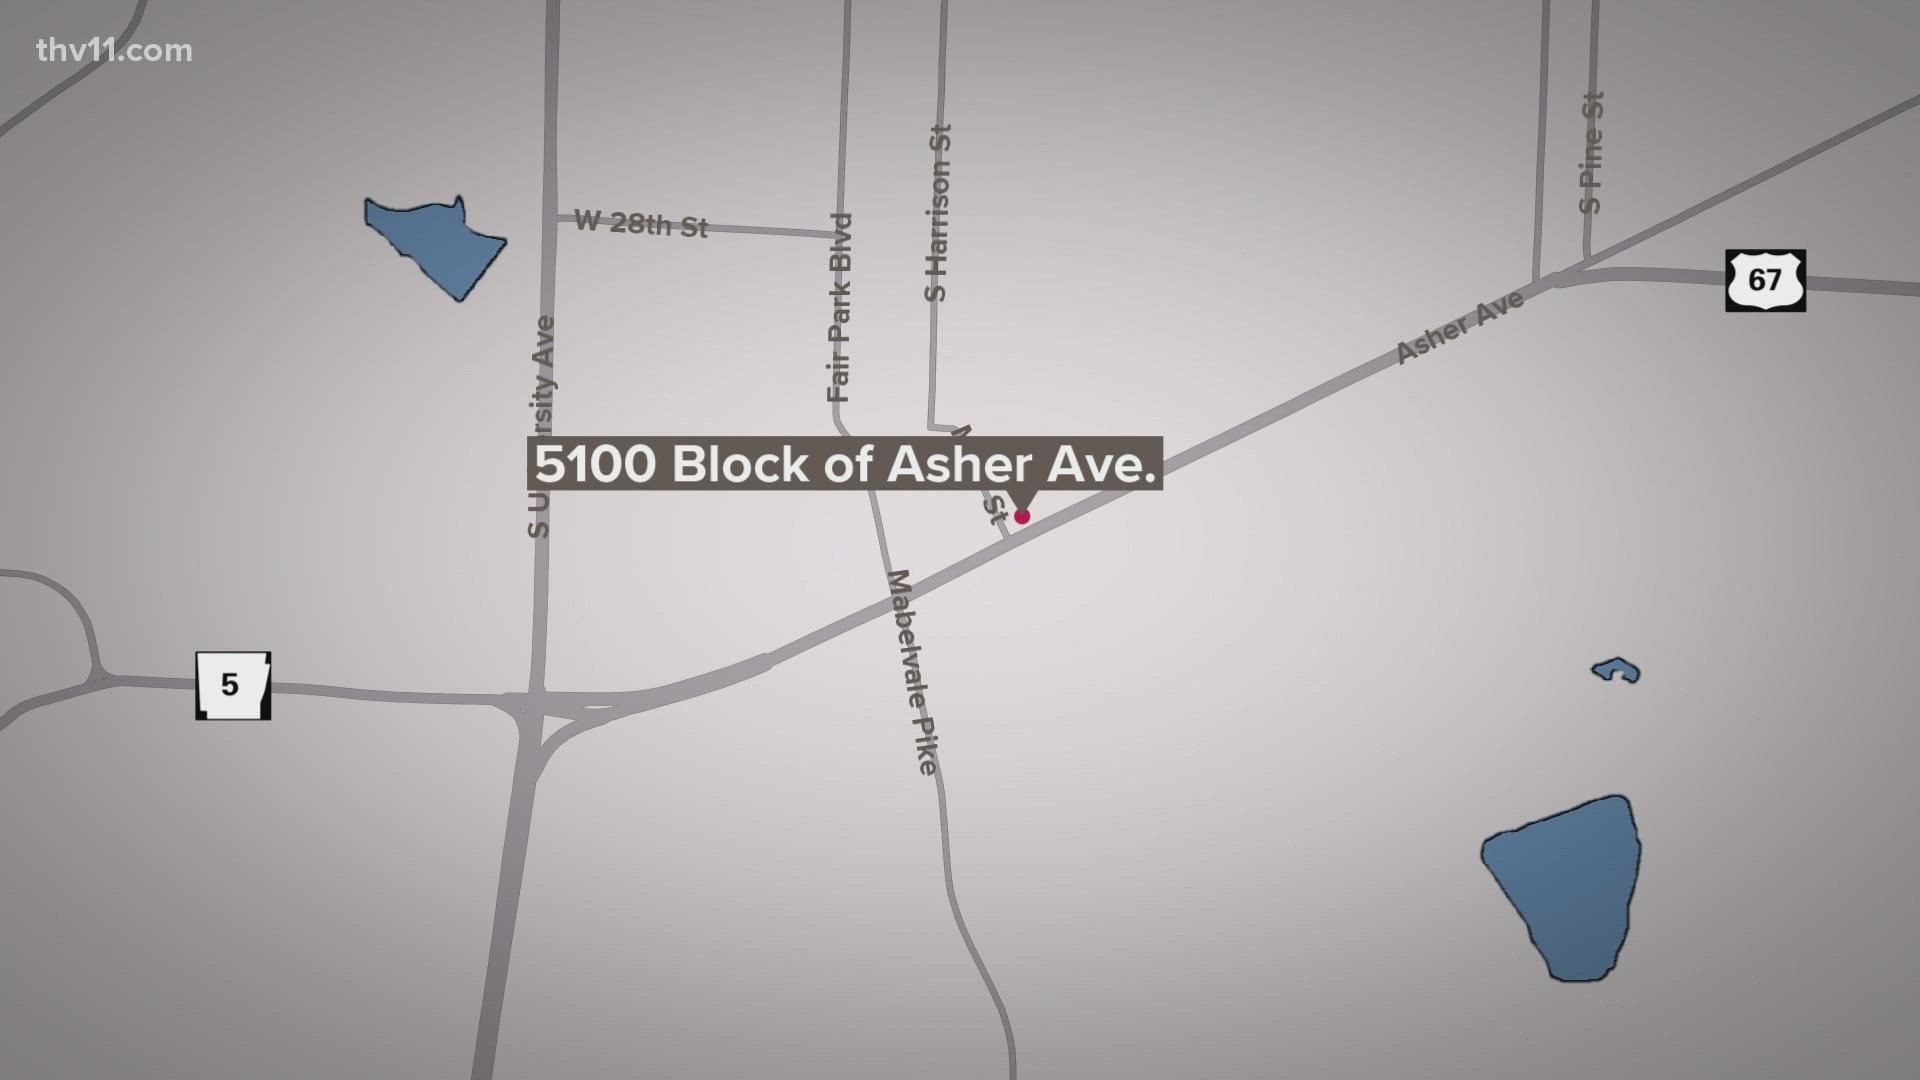 Little Rock police are investigating a homicide that occurred in the late night hours on Asher Ave.